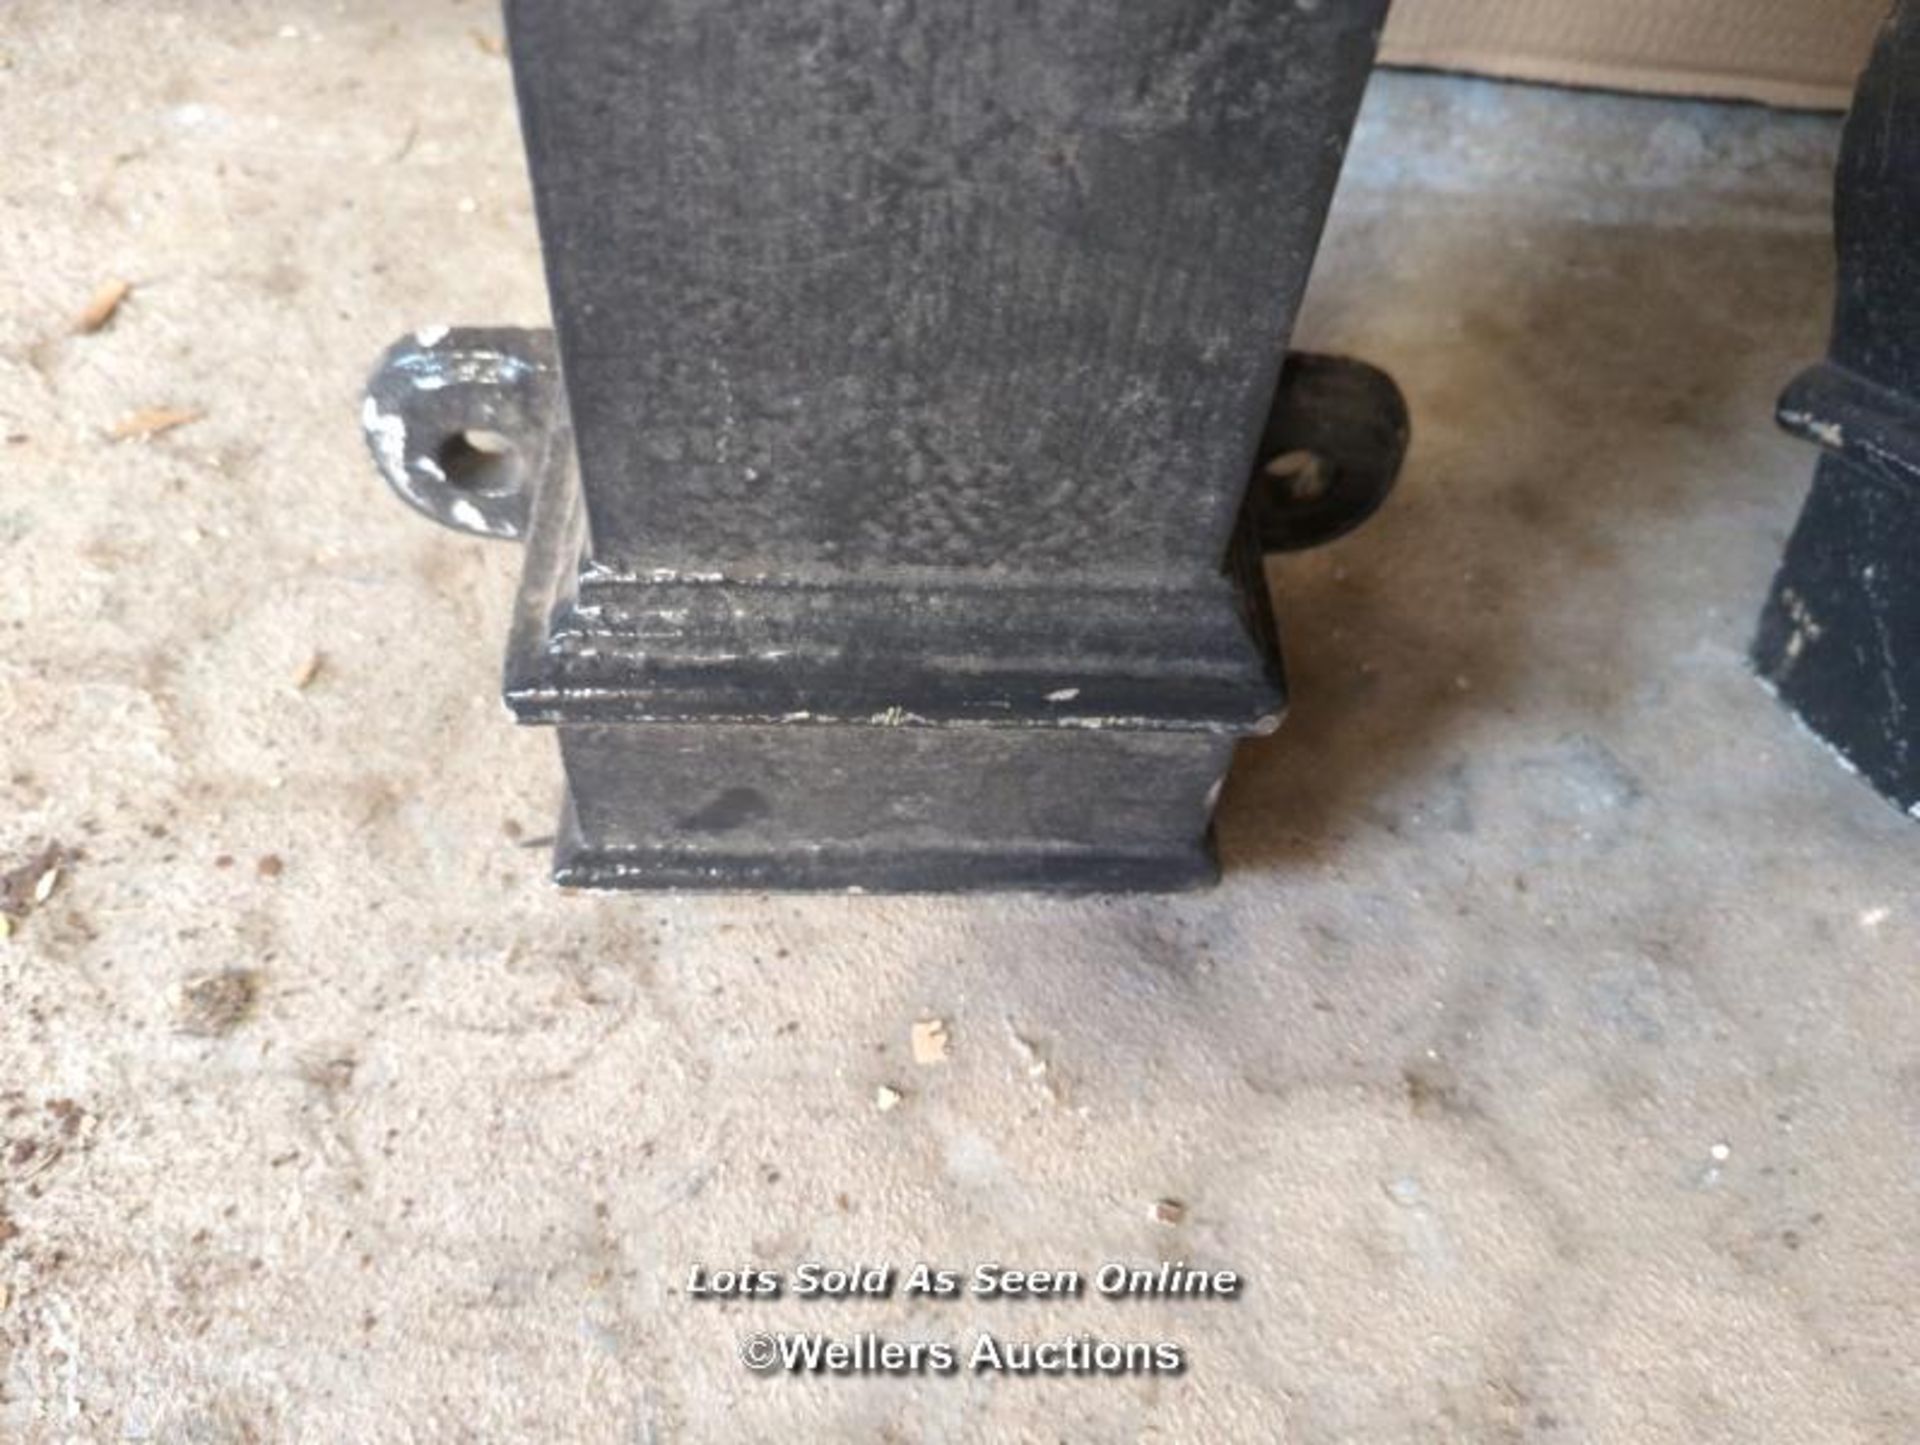 Square cast iron guttering and hopper 4" x 3" internal section. - Image 4 of 6